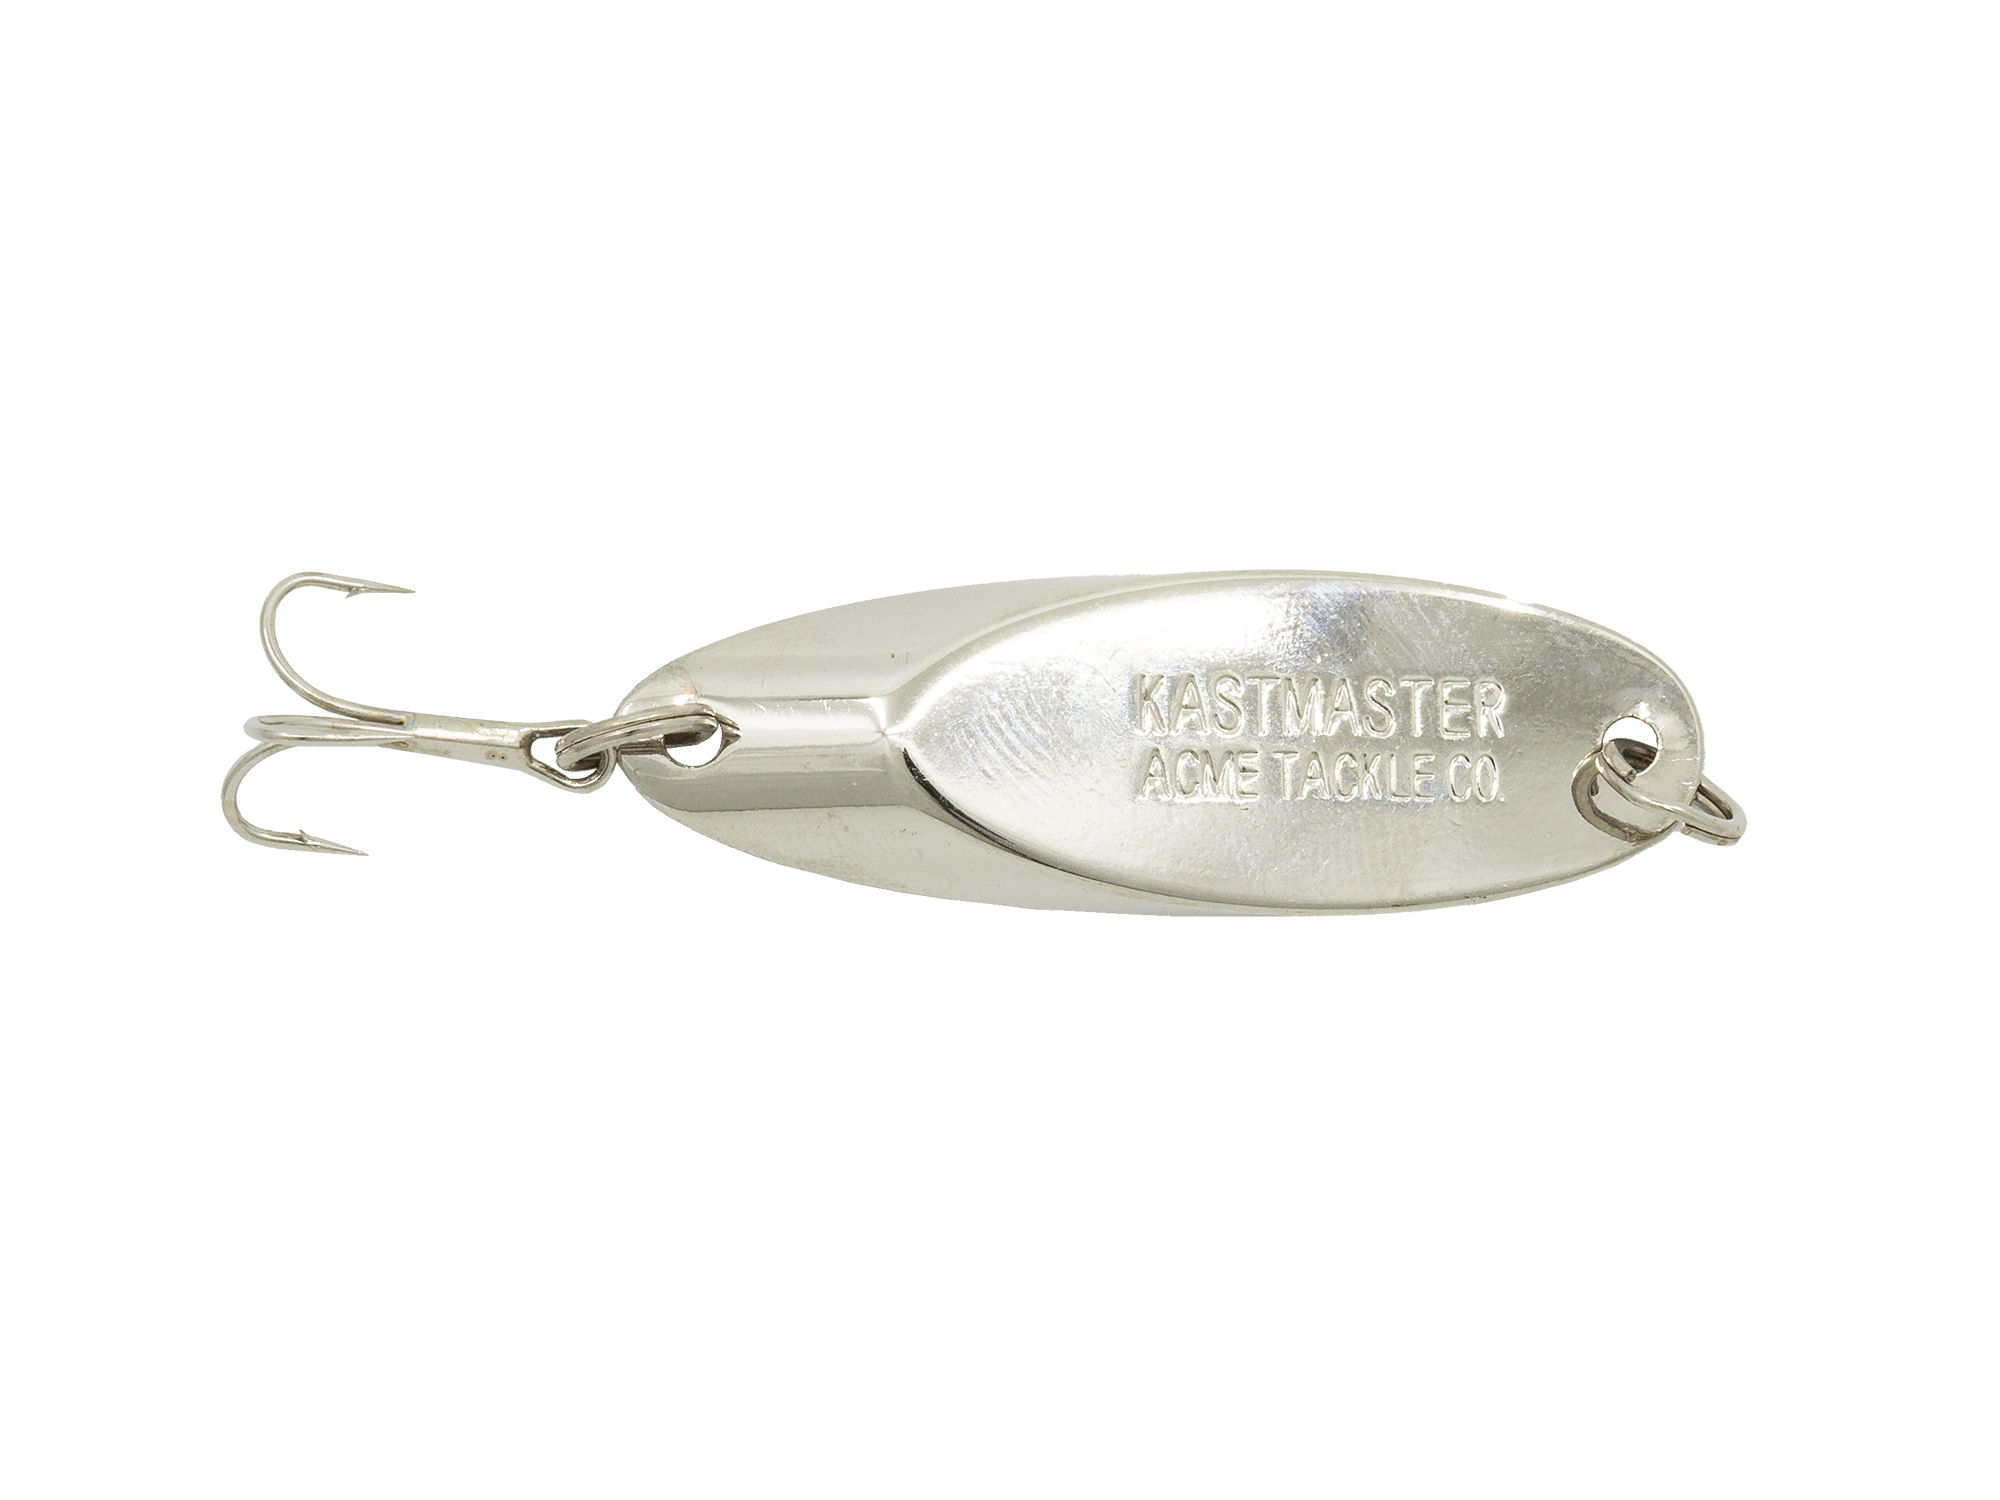 Acme Kastmaster Lure with Tube, Chrome Red, 3-Ounce